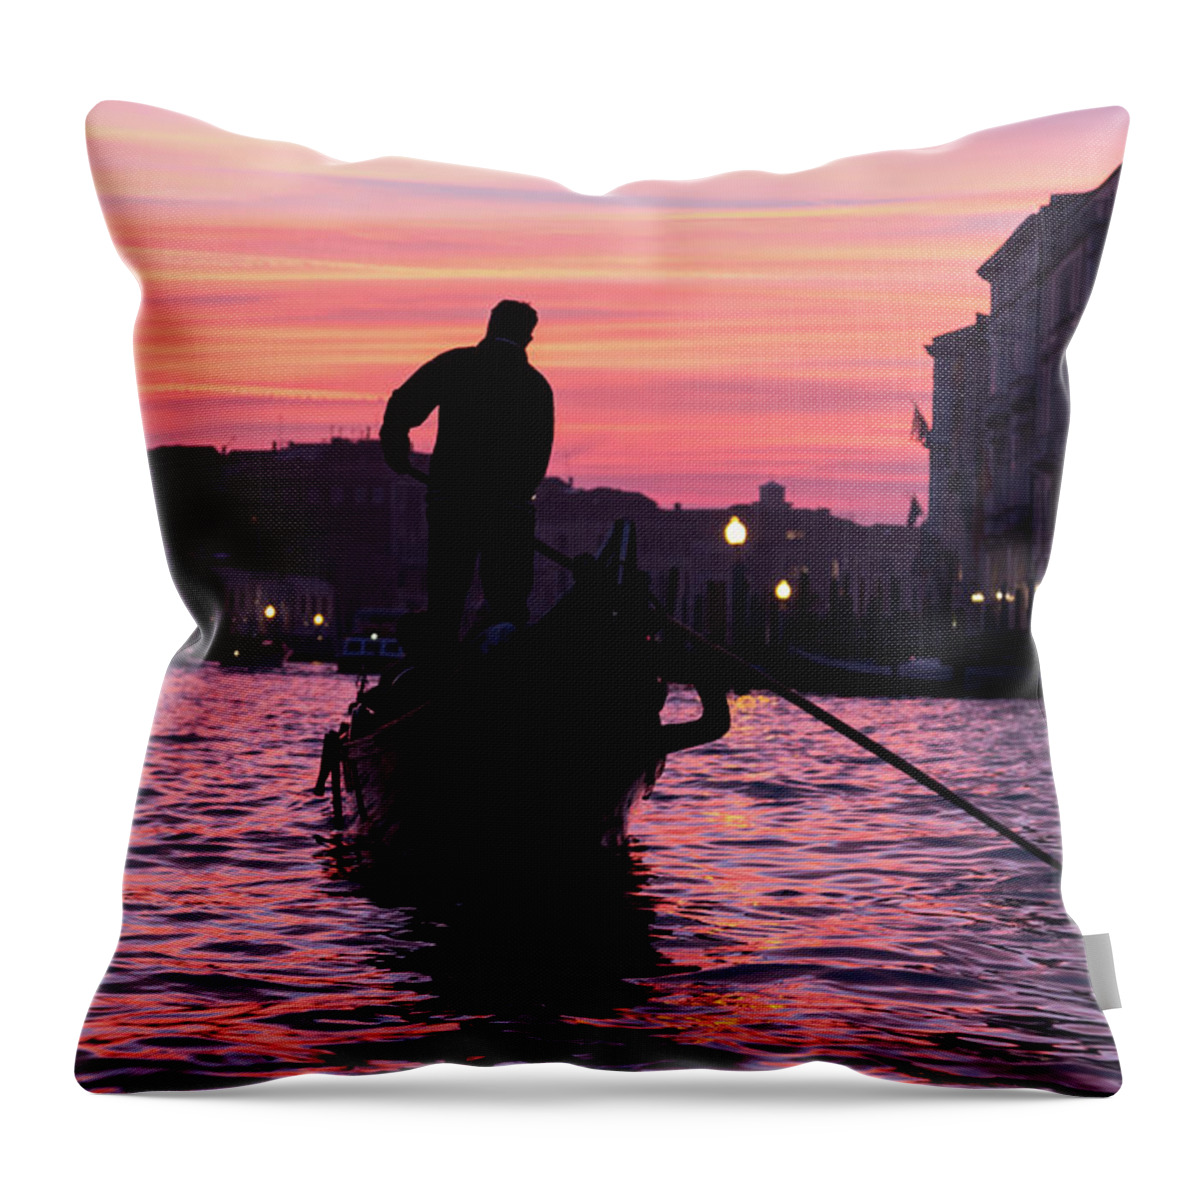 Gondola Throw Pillow featuring the photograph Gondolier at Sunset by John Daly